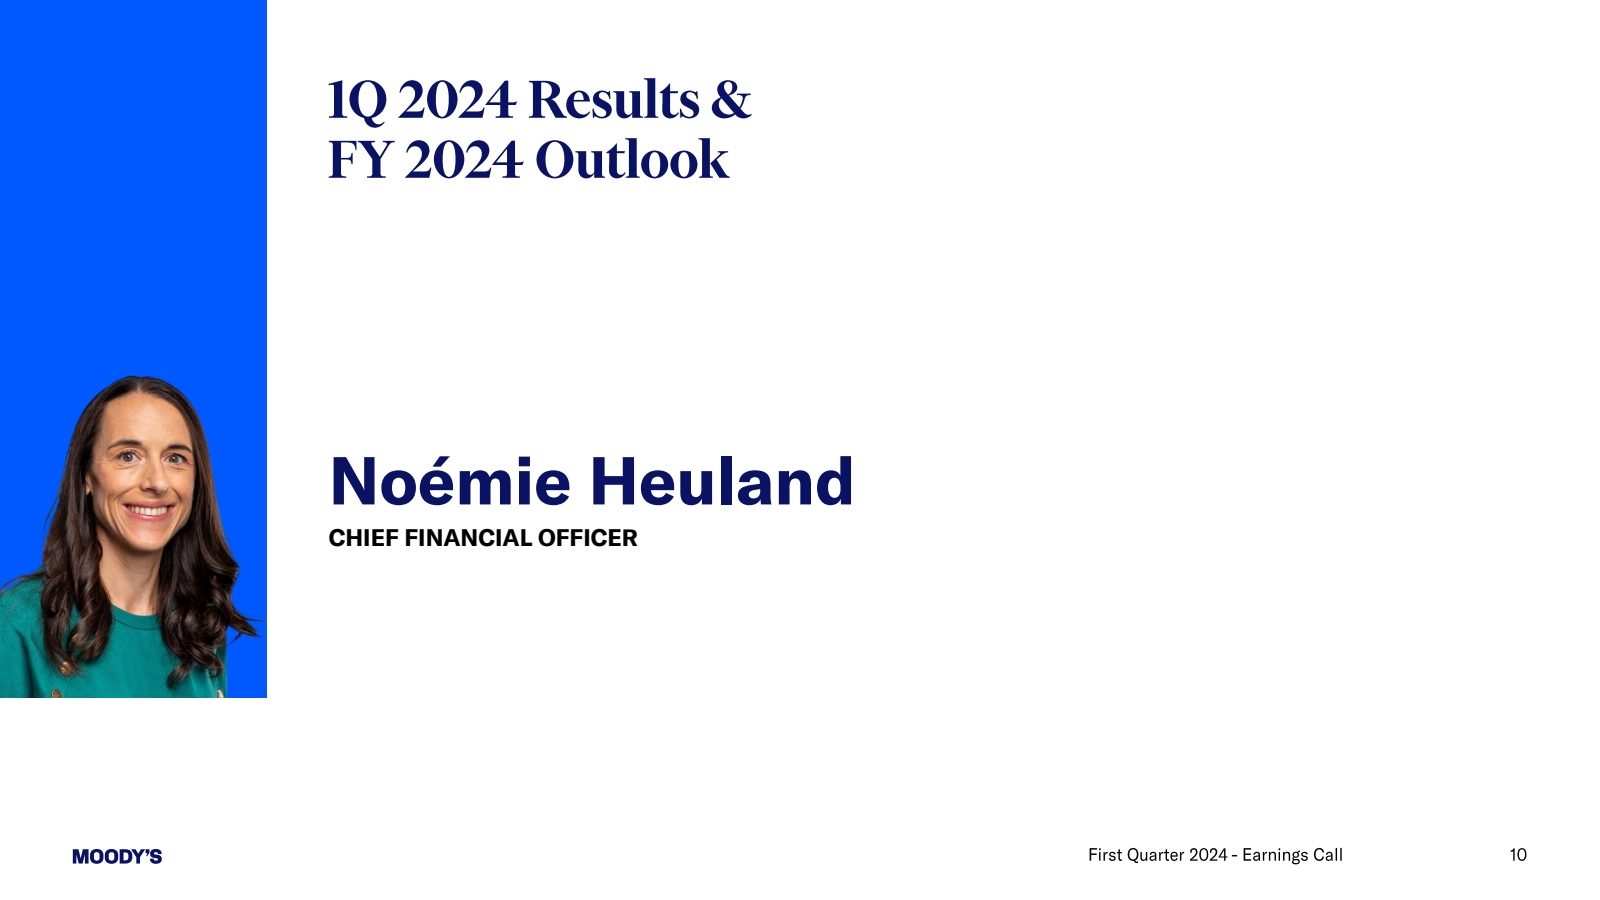 1Q 2024 Results & FY